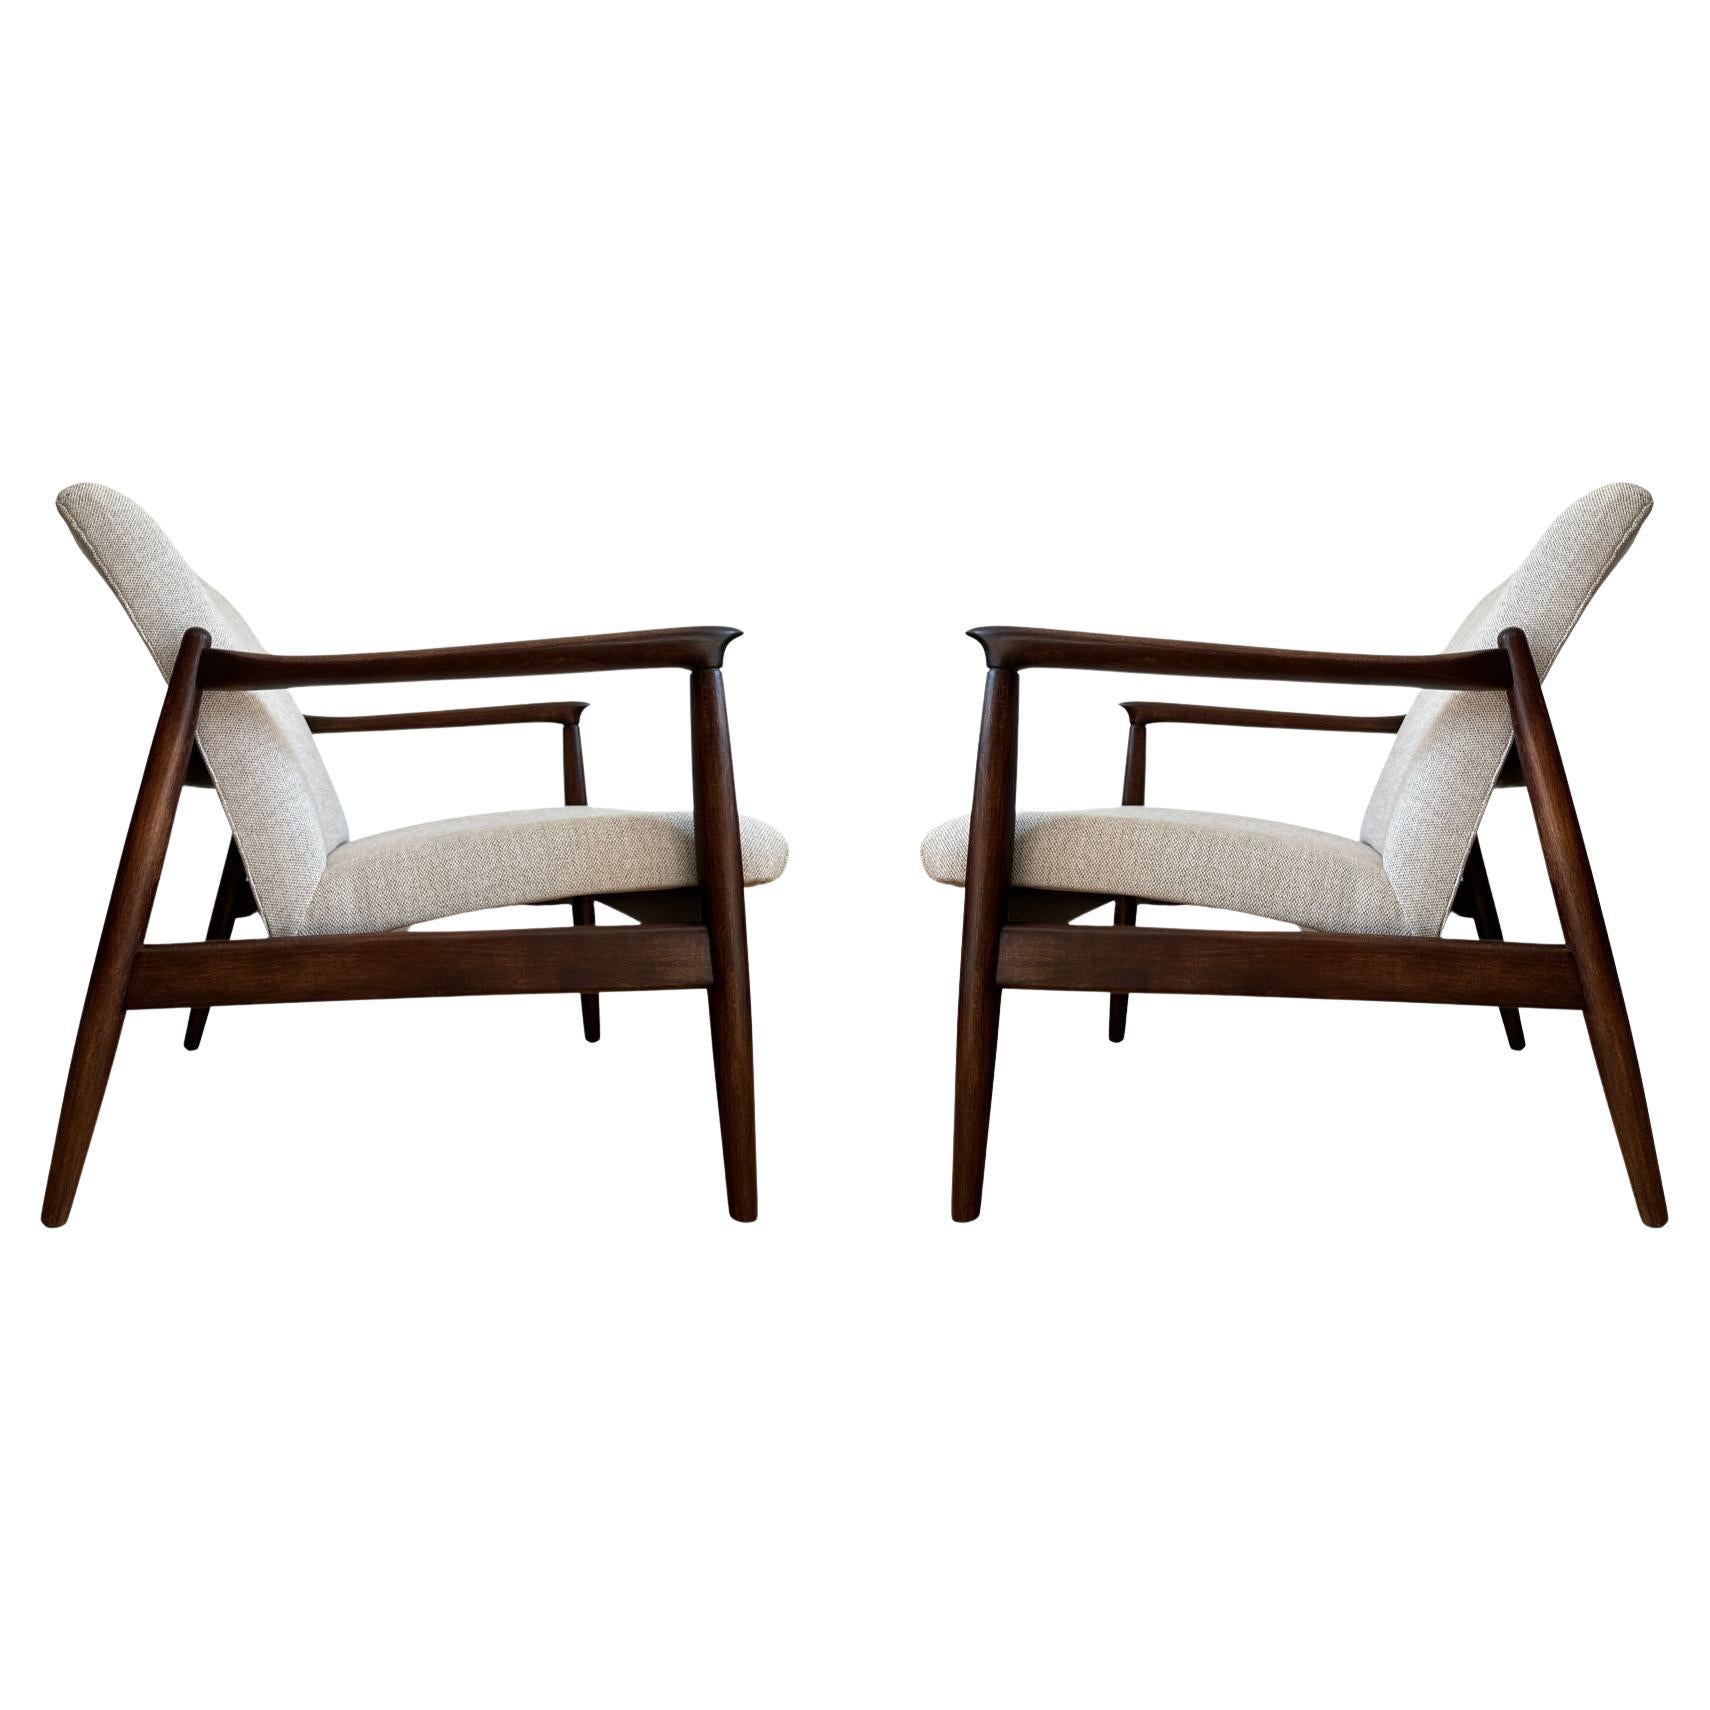 Pair of Mid Century Beige GFM-64 Armchairs by Edmund Homa, 1960s